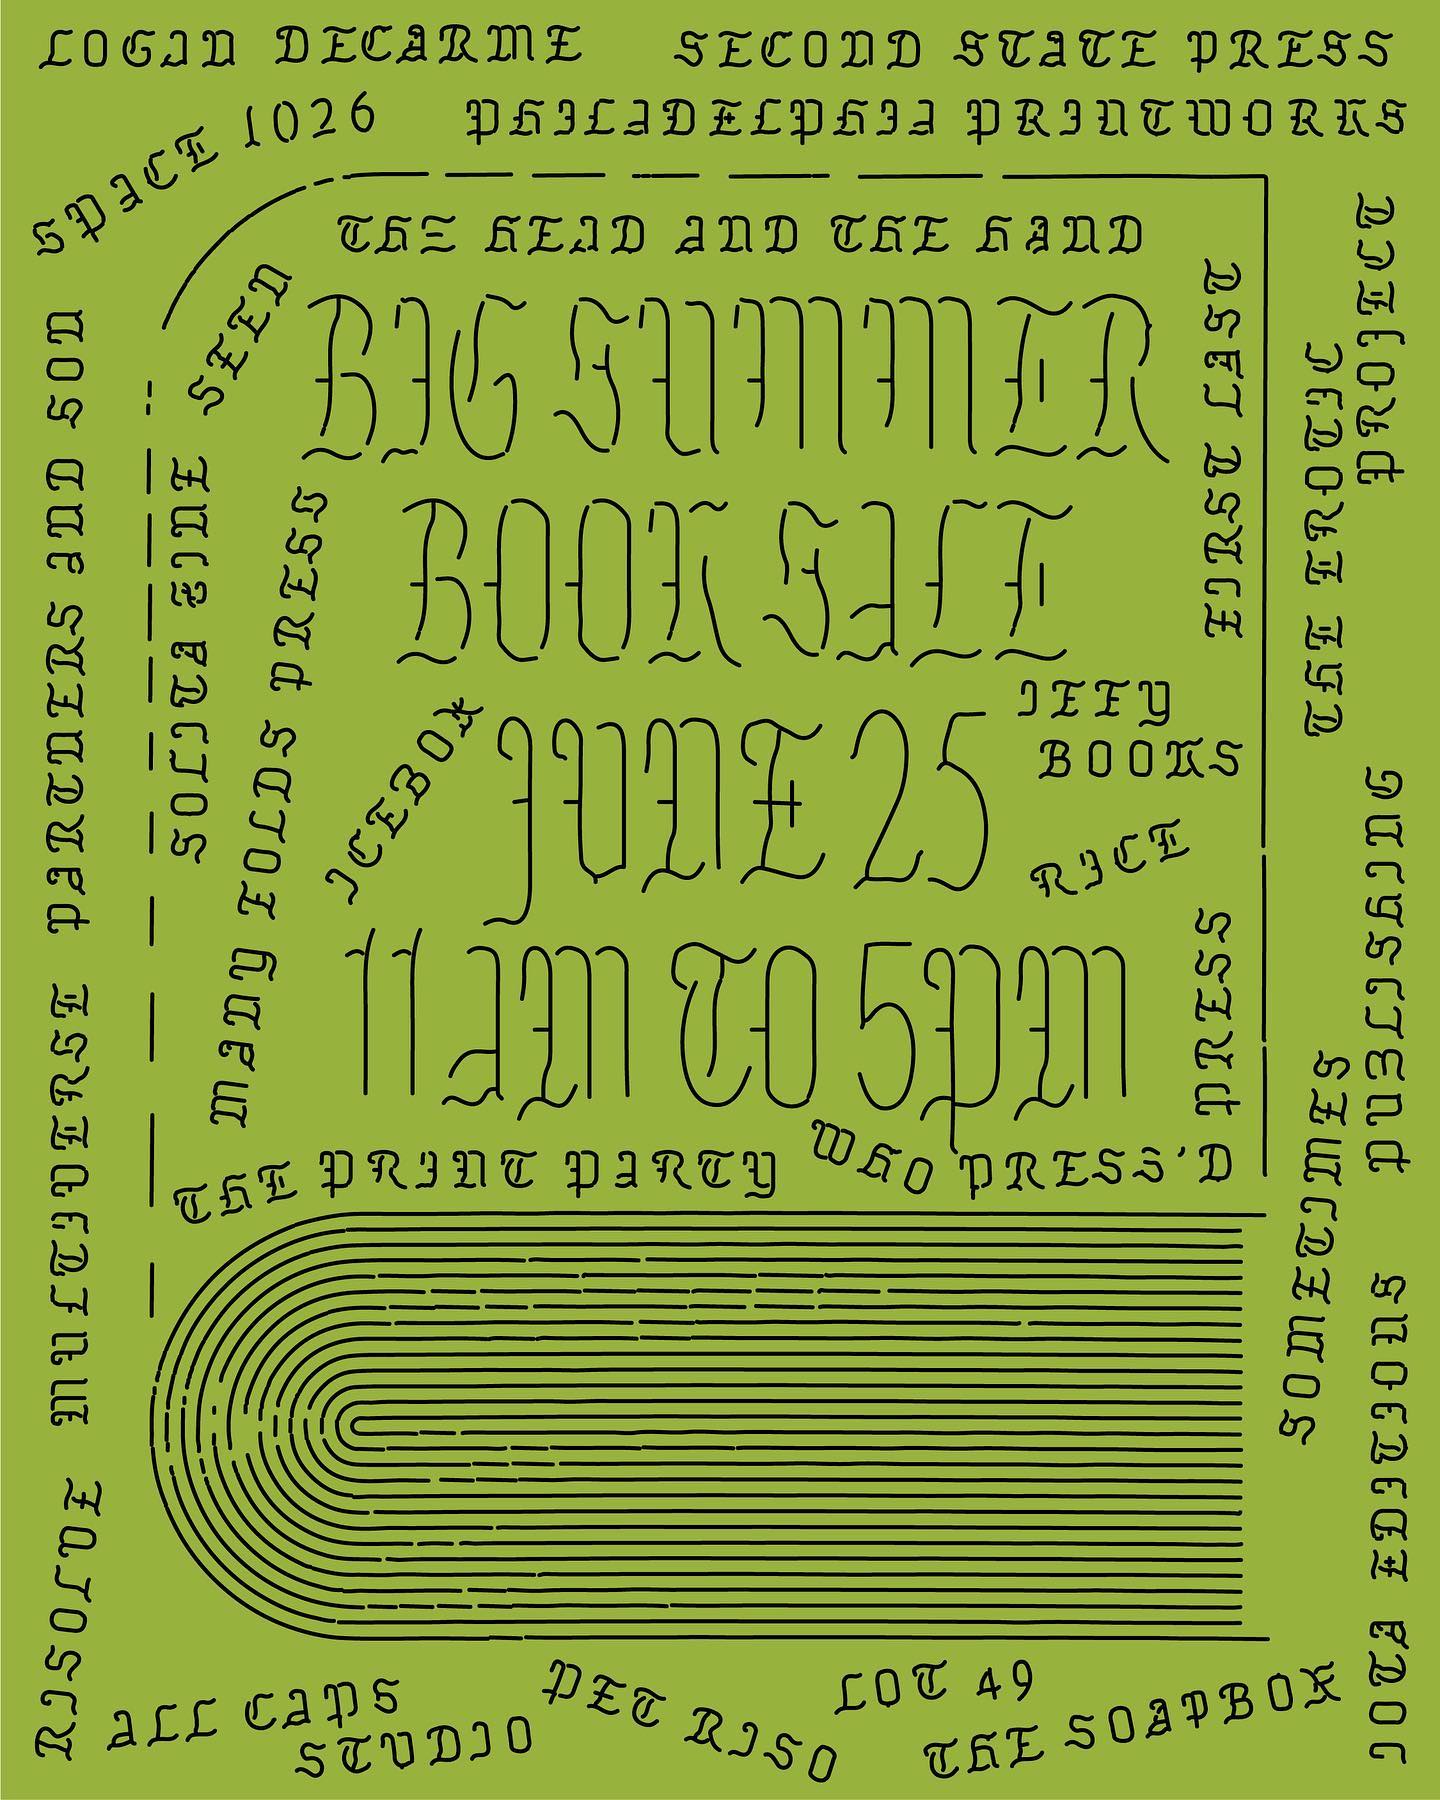 Flyer for the Ulises Big Summer Book Sale on June 25 from 11 am to 5 pm. An illustration of a book is surrounded by the names of booksellers, written in a quasi-gothic script.